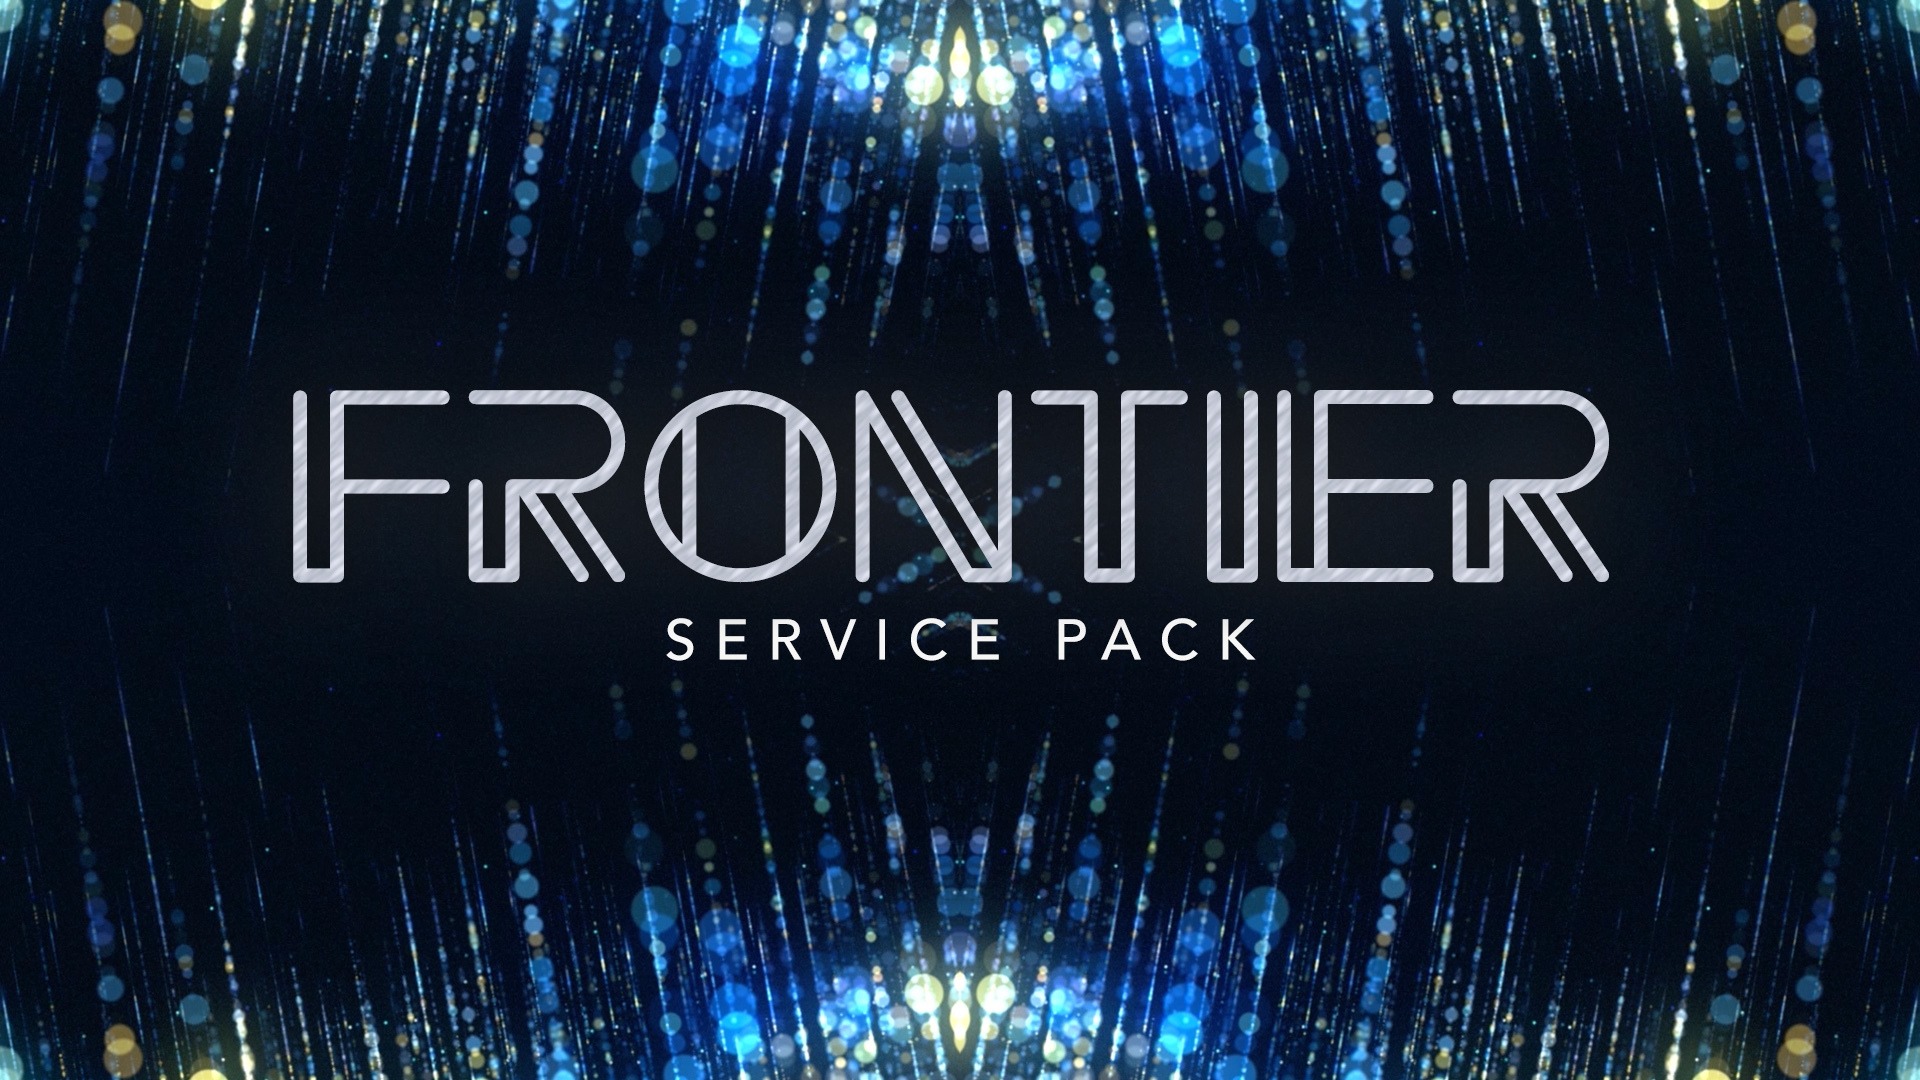 Frontier Service Pack